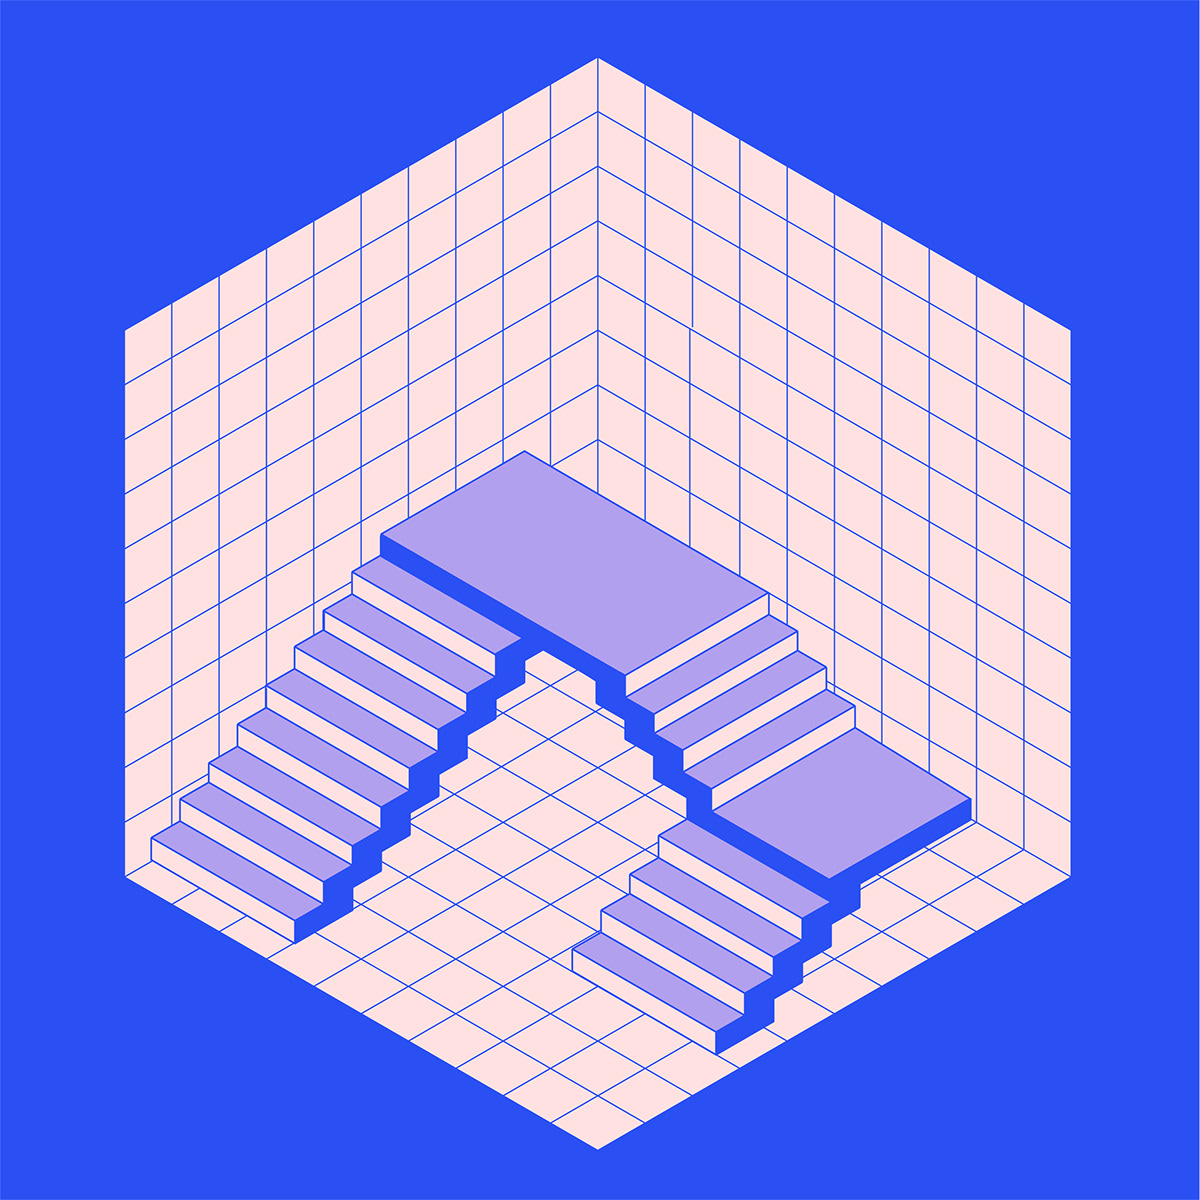 stair color blue pink grid architecure typology Circulation funky groovy